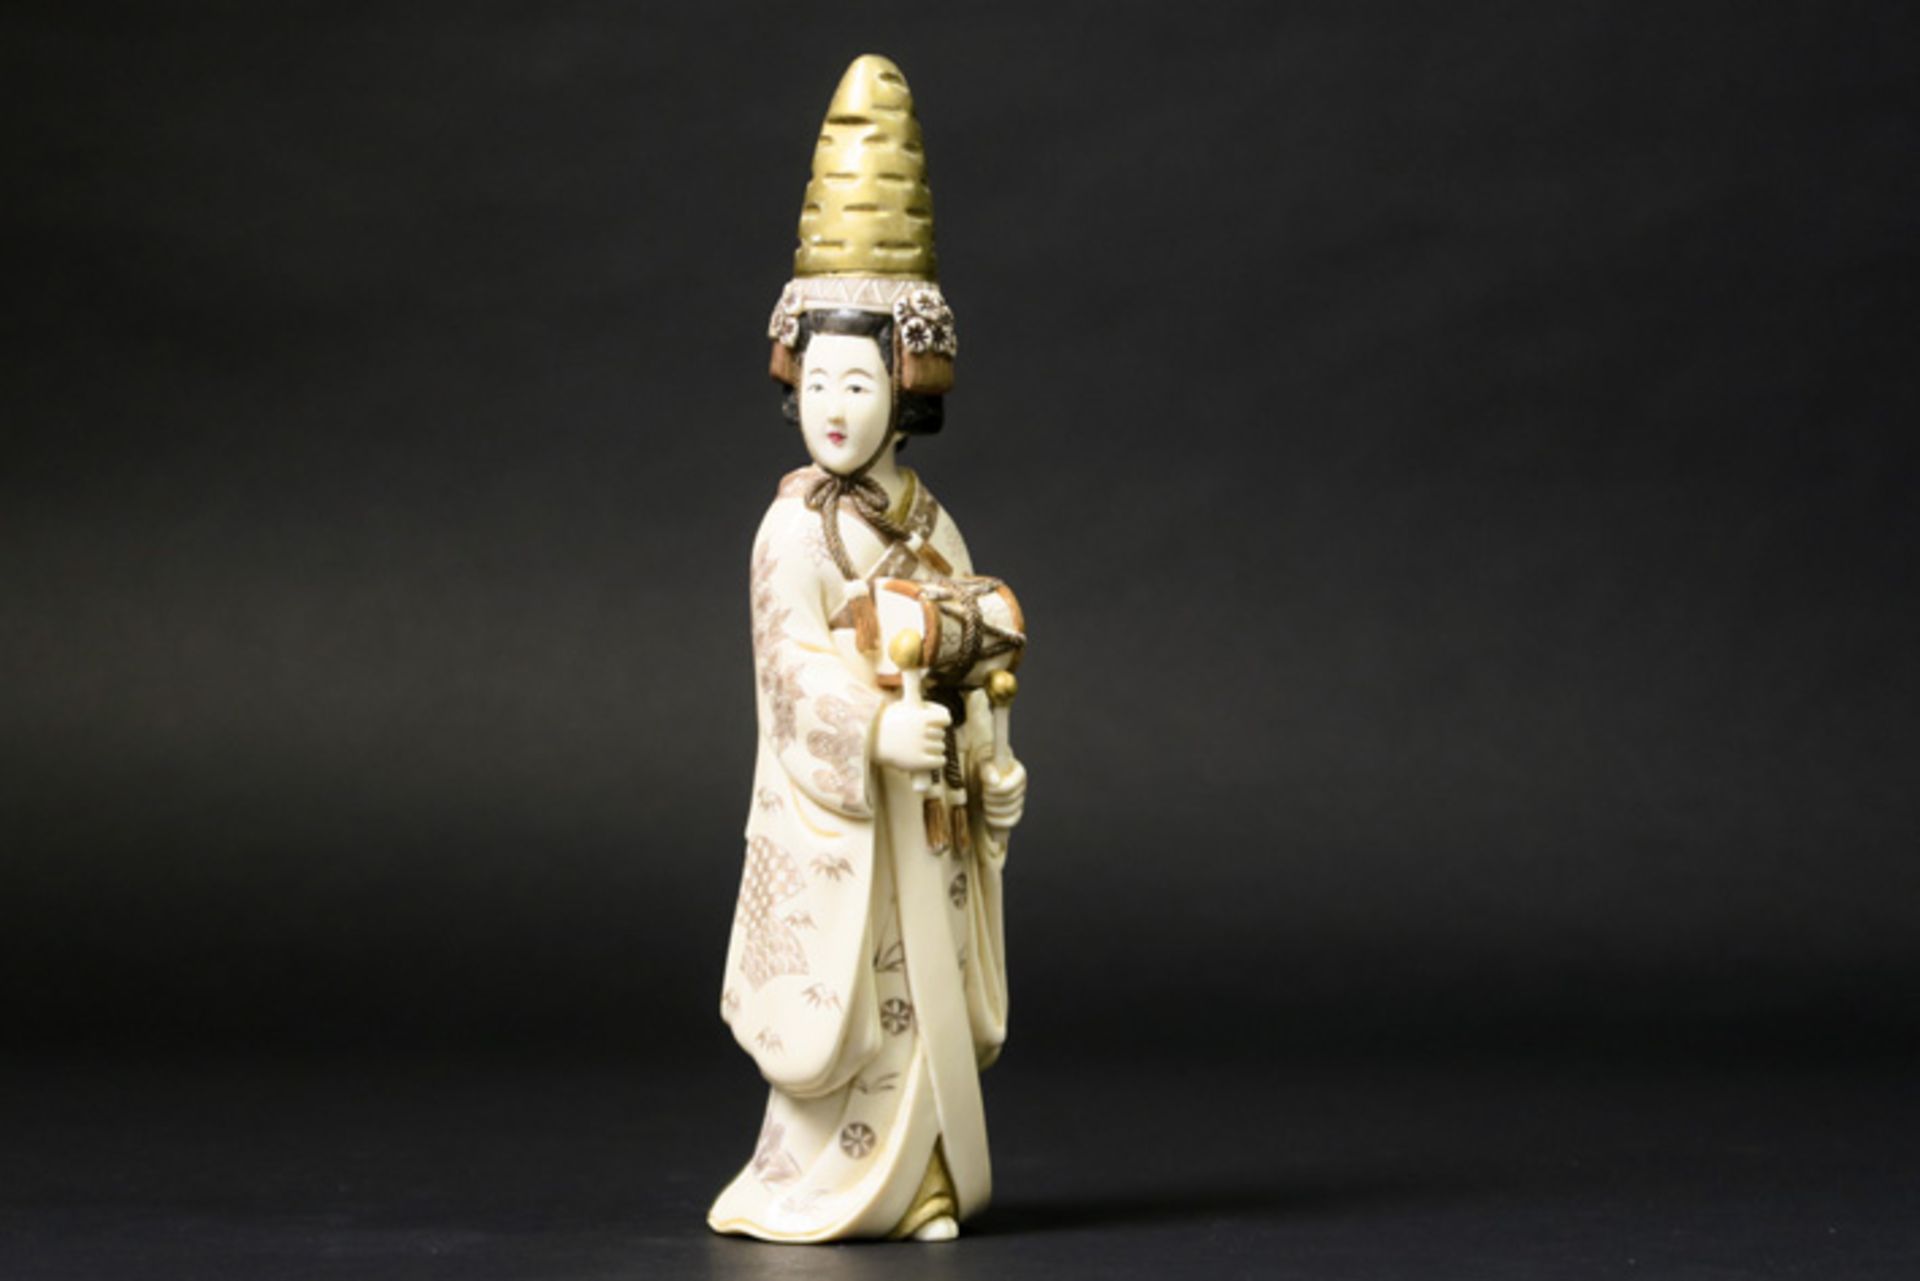 old Chinese sculpture in polychromed ivory Chinese sculptuur in deels gepolychromeerde ivoor : "